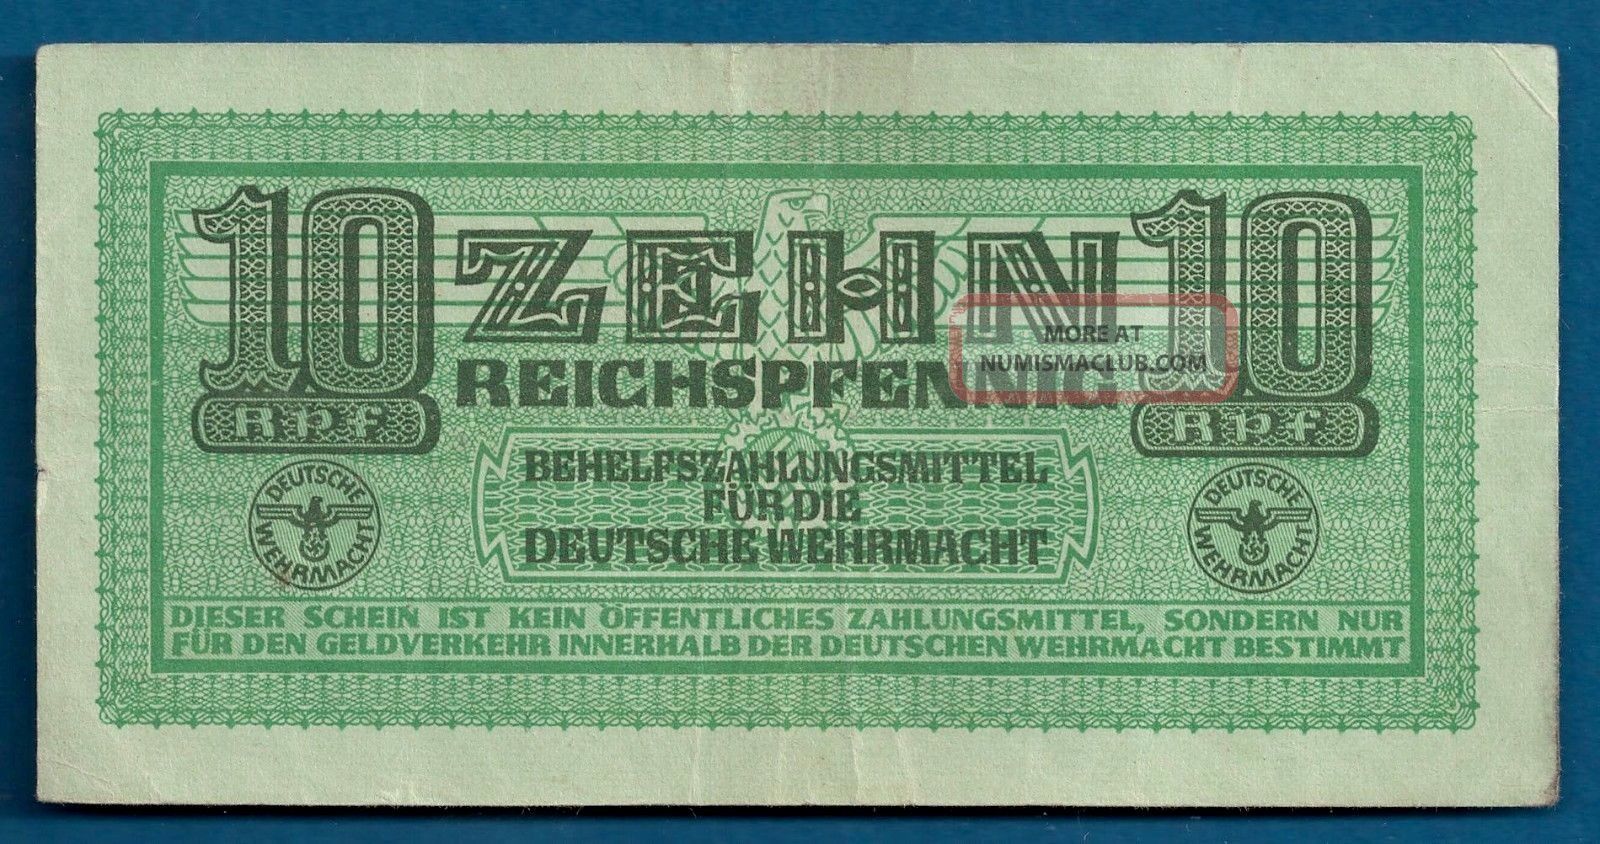 Ww2 German Armed Forces 10 Reichspfennig 1942 M - 34 Military Payment Certificate Europe photo